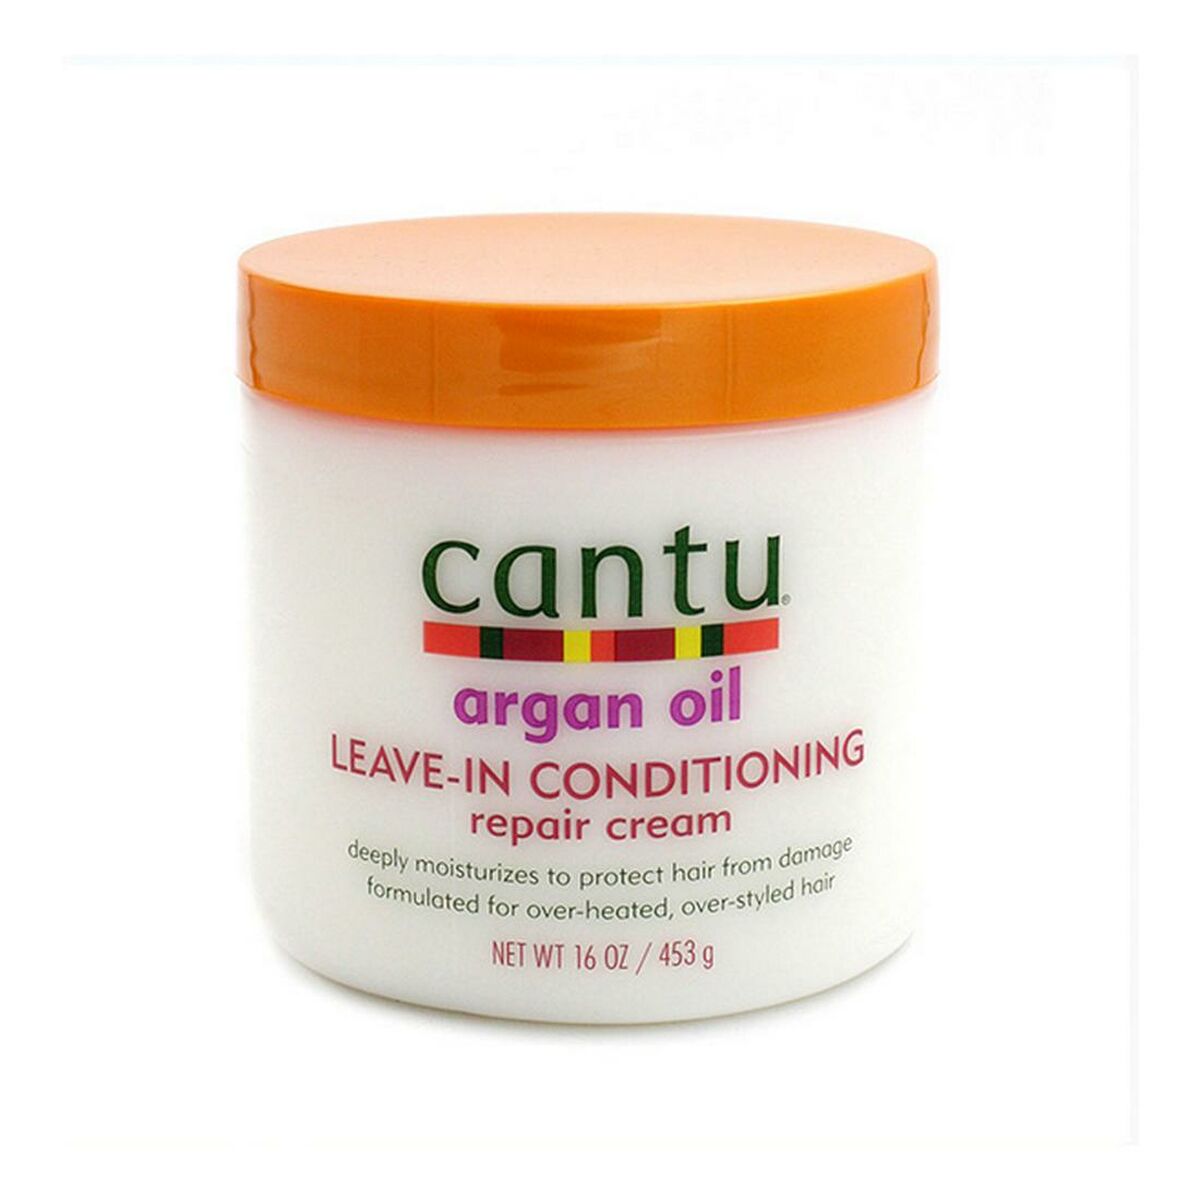 Conditioner Shea Butter Leave-In Cantu SG_B01015YL0S_US (453 g)